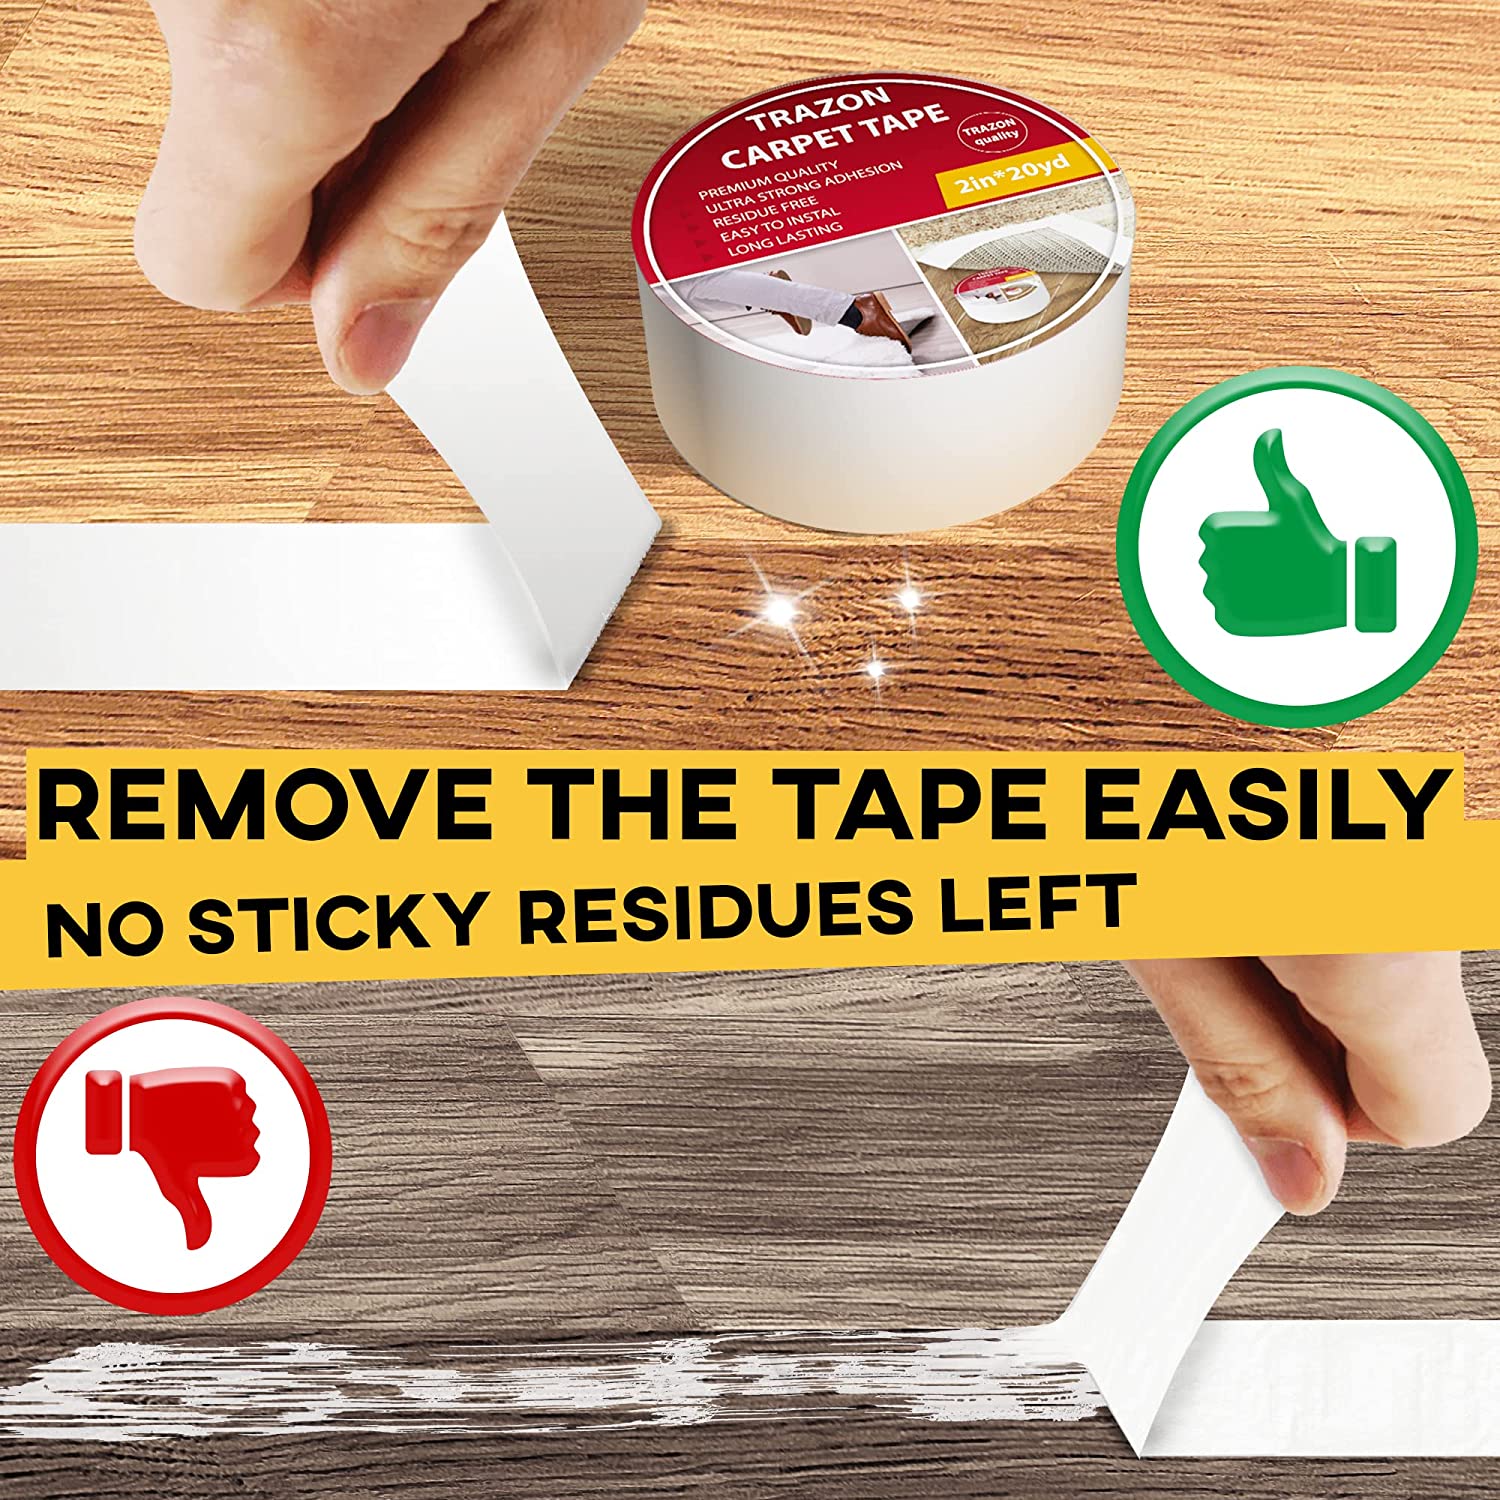 Double Sided Carpet Tape - Rug Grippers Tape for Area Rugs and